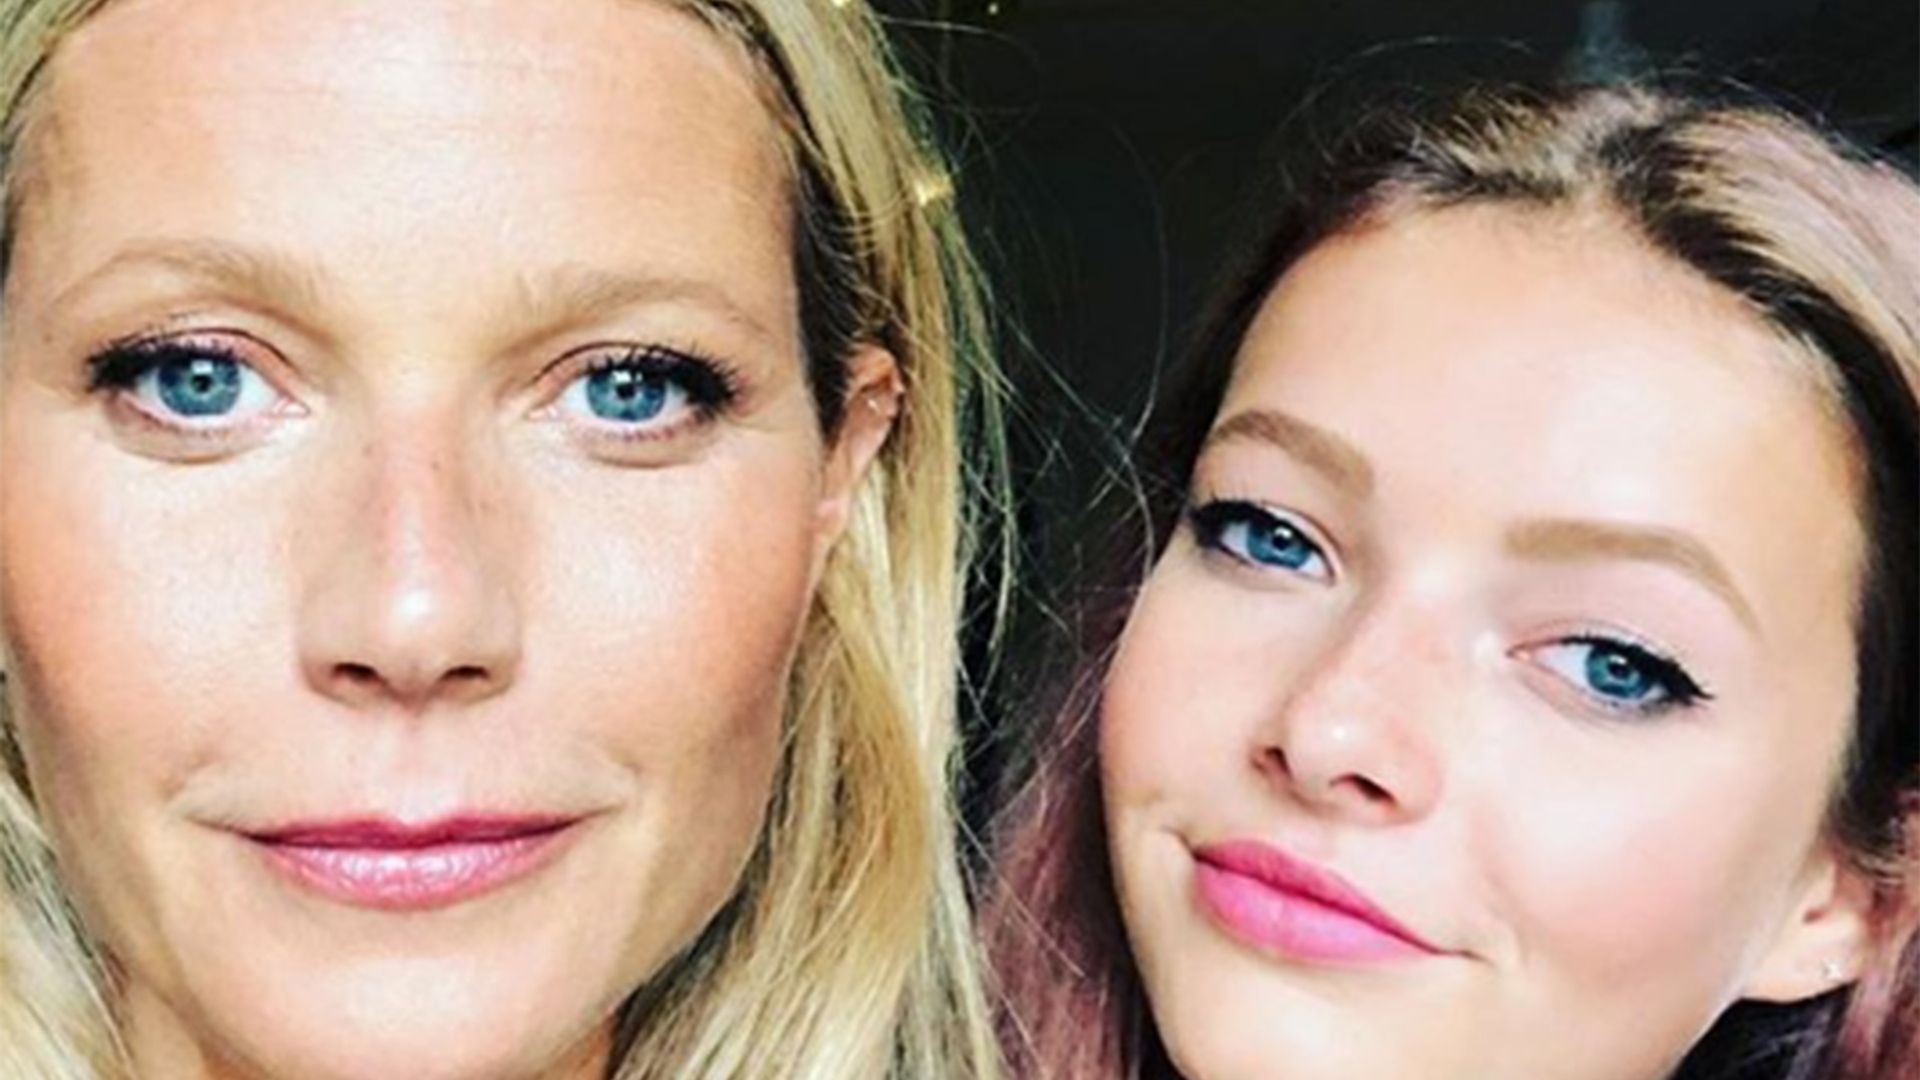 Gwyneth Paltrow's daughter Apple really didn't want her mum to share this photo